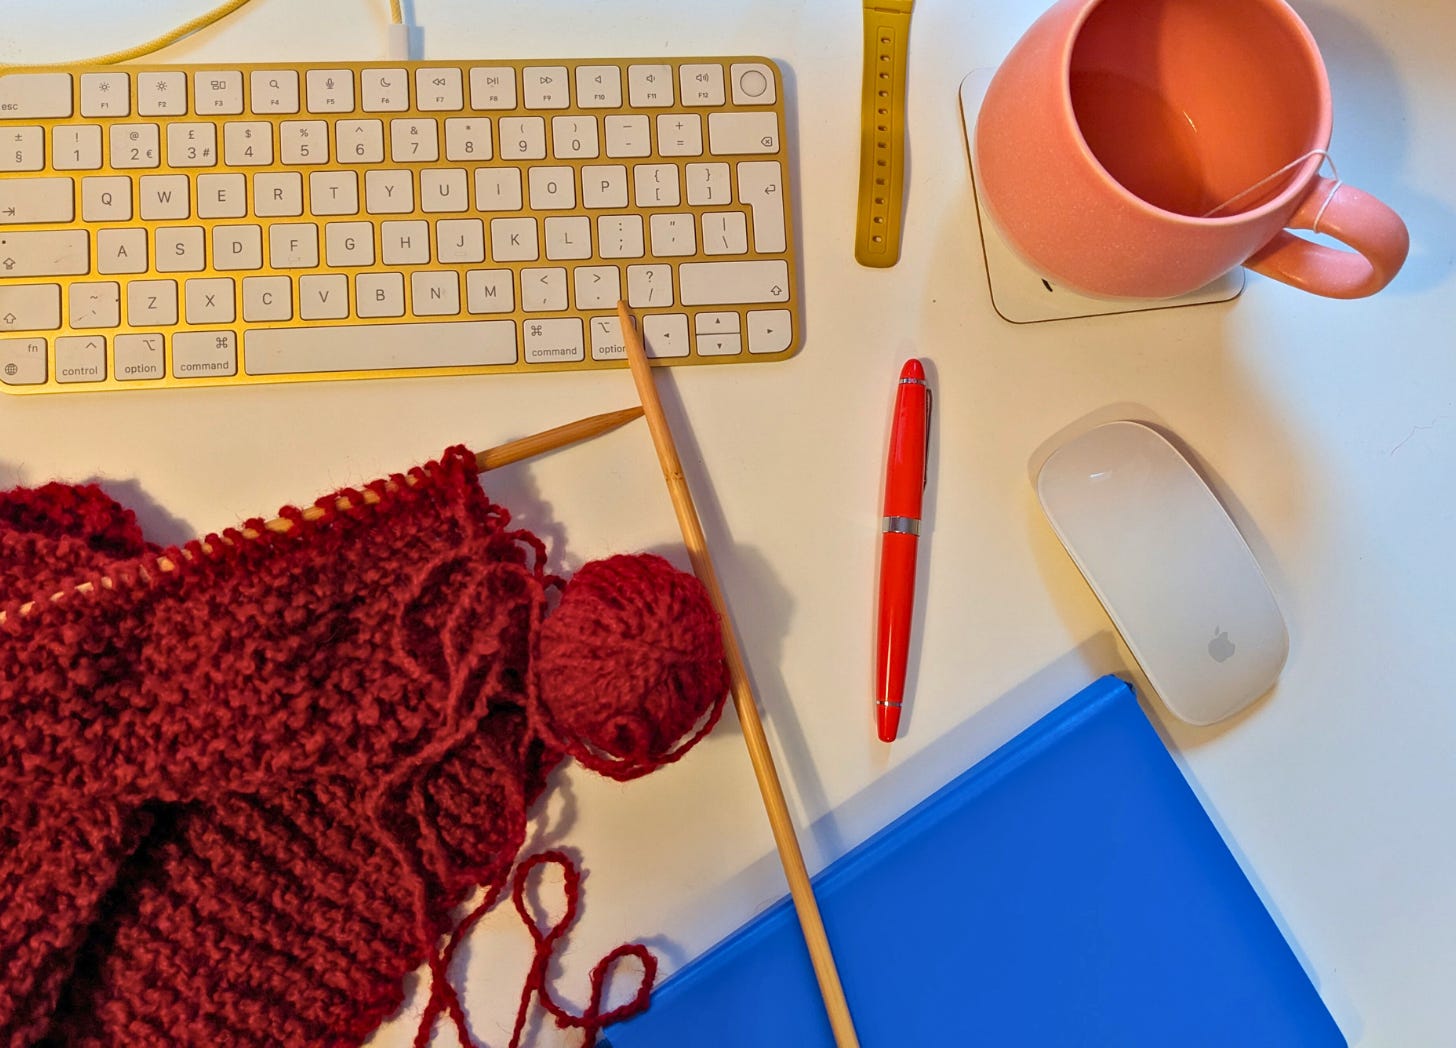 An image that looks down on a desk with a keyboard, mouse, pen, notebook and knitting needles and a red ball of wool. There is a pink mug too.